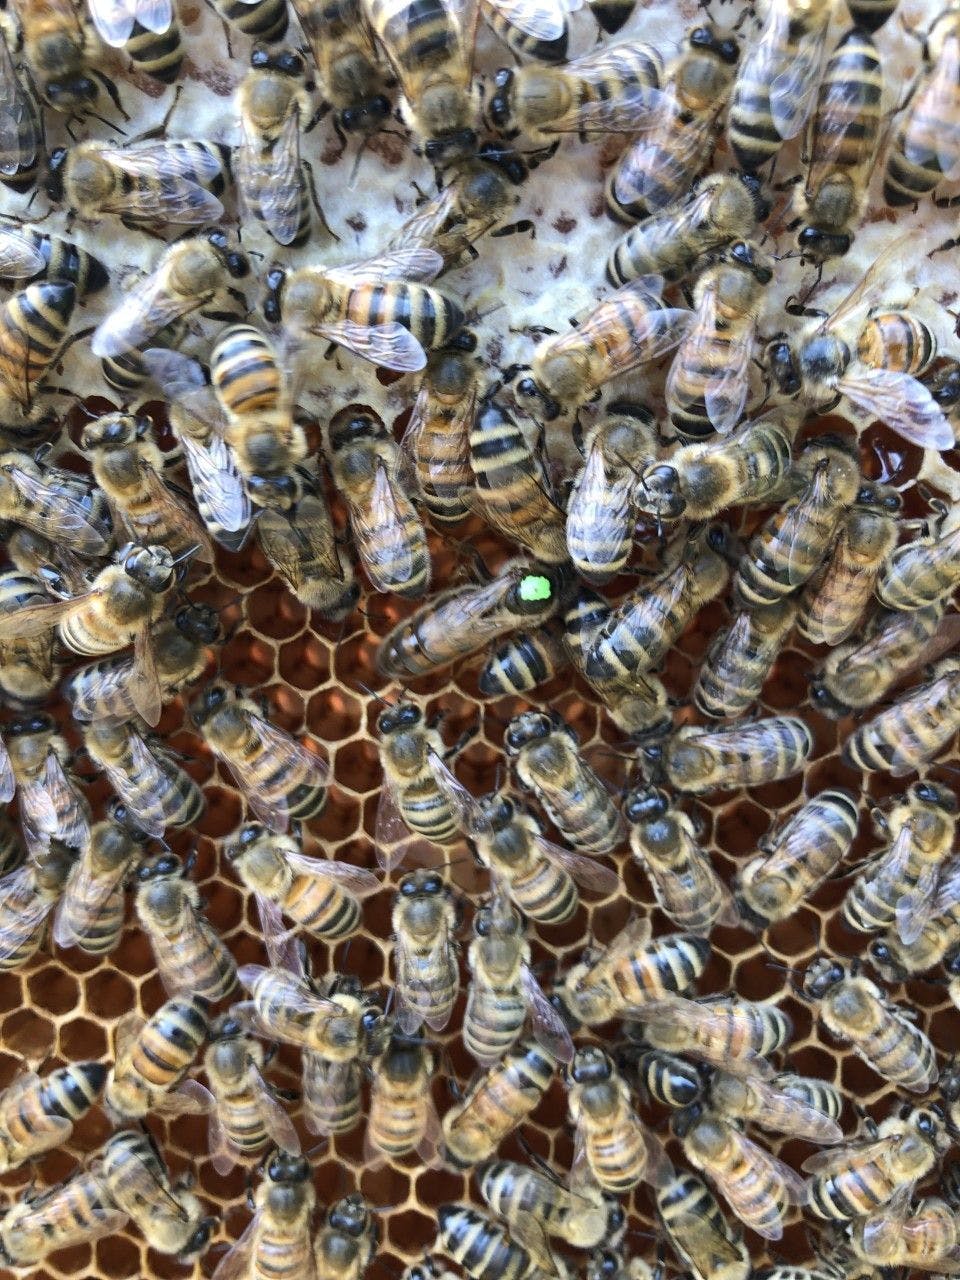 Honeybee vaccination: How does it work, and what does it mean?